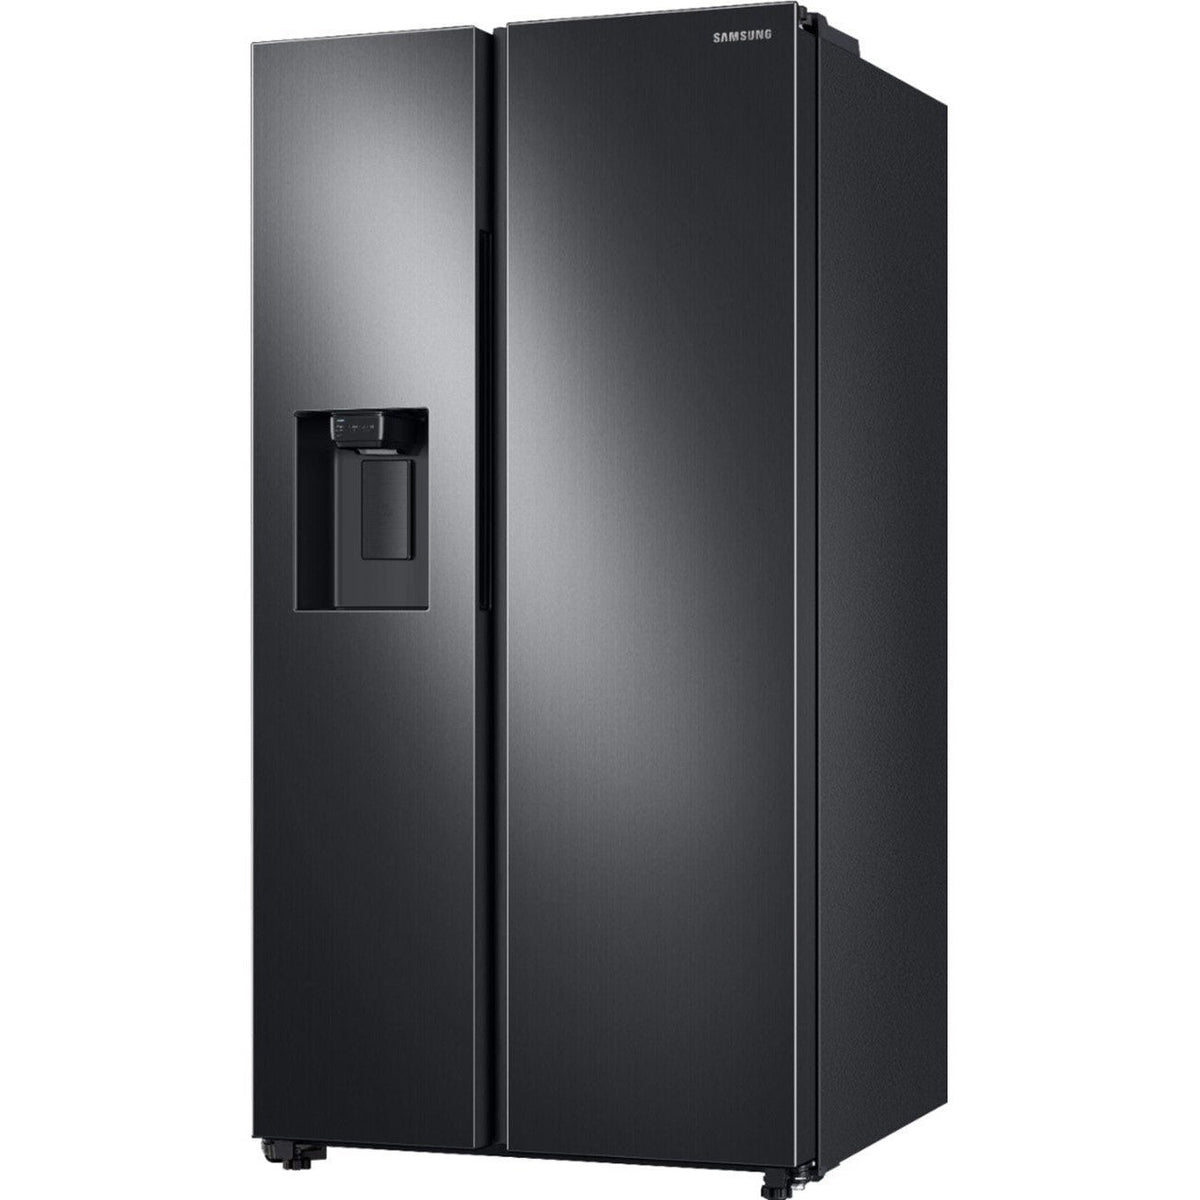 SAMSUNG RS27T5200SG/AA 27.4 Cu. Ft. Side-by-Side Refrigerator - Black Stainless Steel